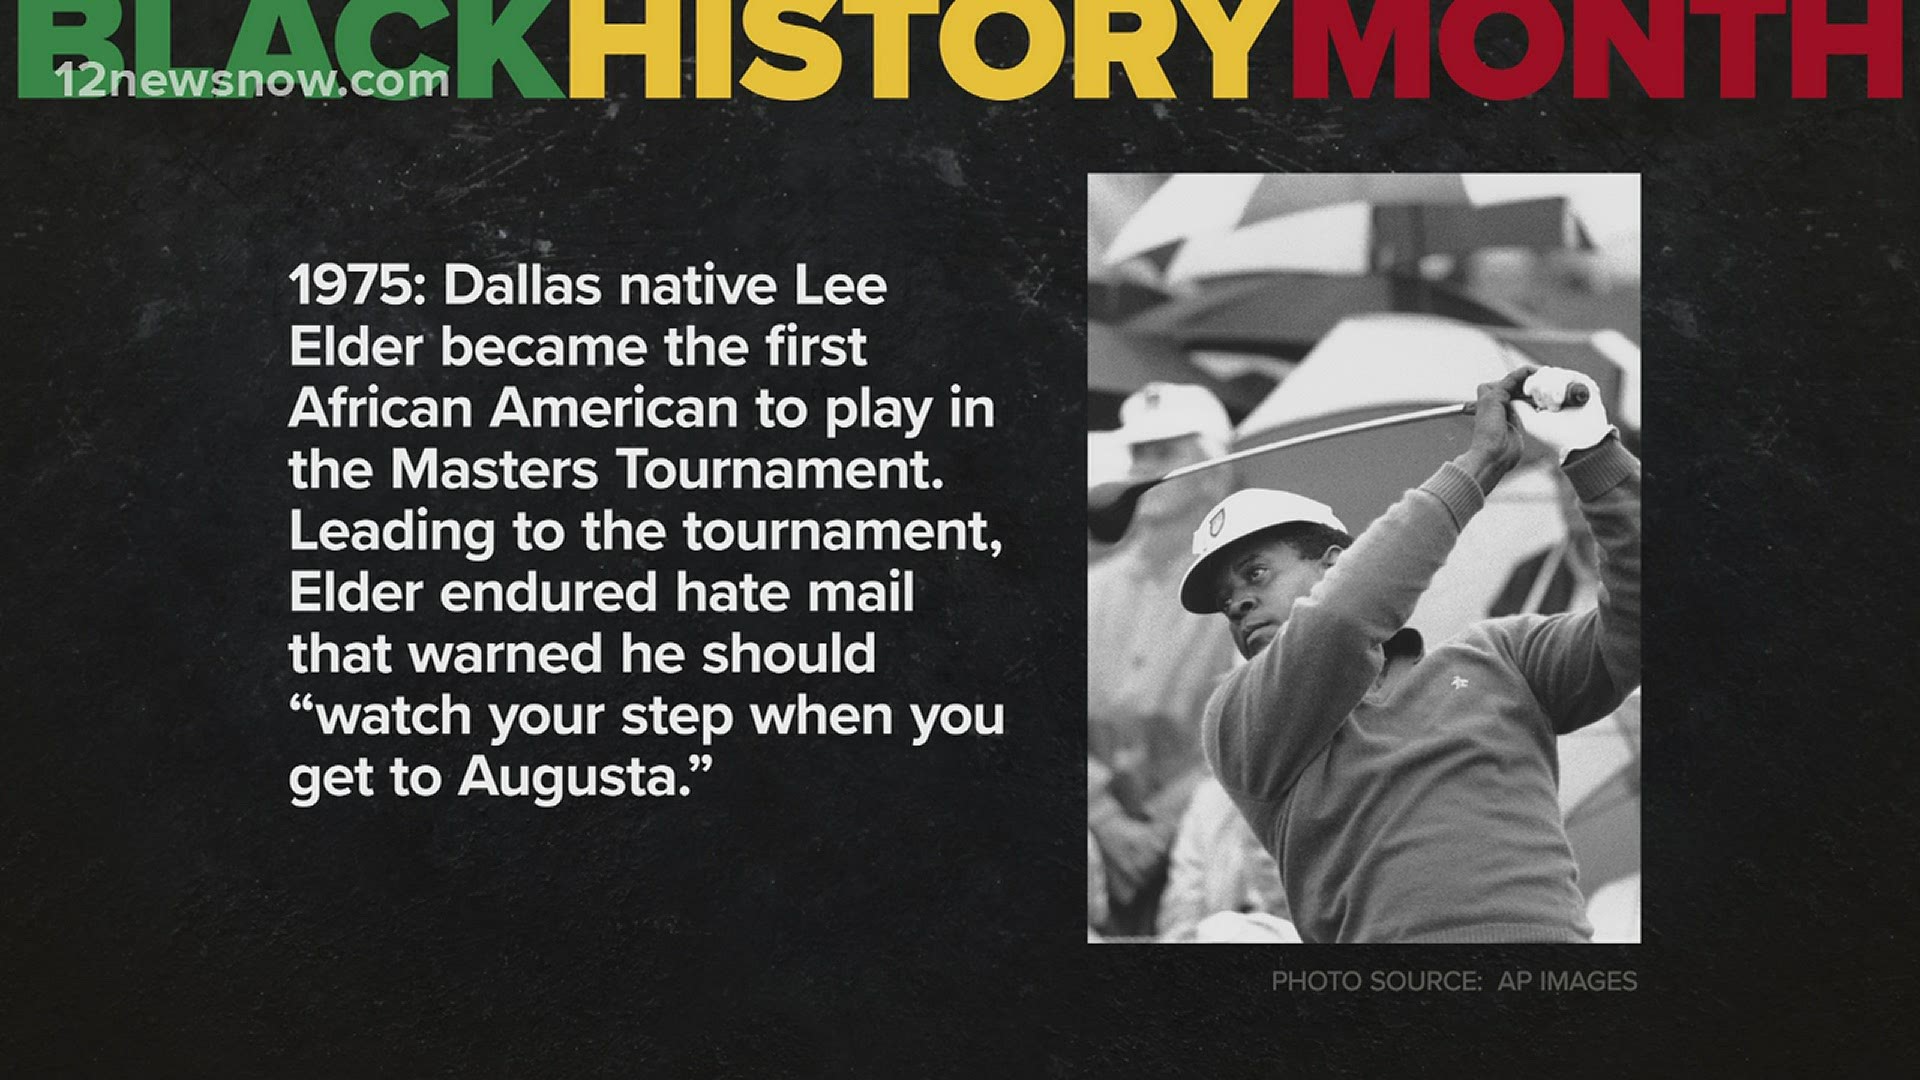 Leading up to the tournament, Lee Elder endured hate mail warning him to "watch your step when you get to Augusta."